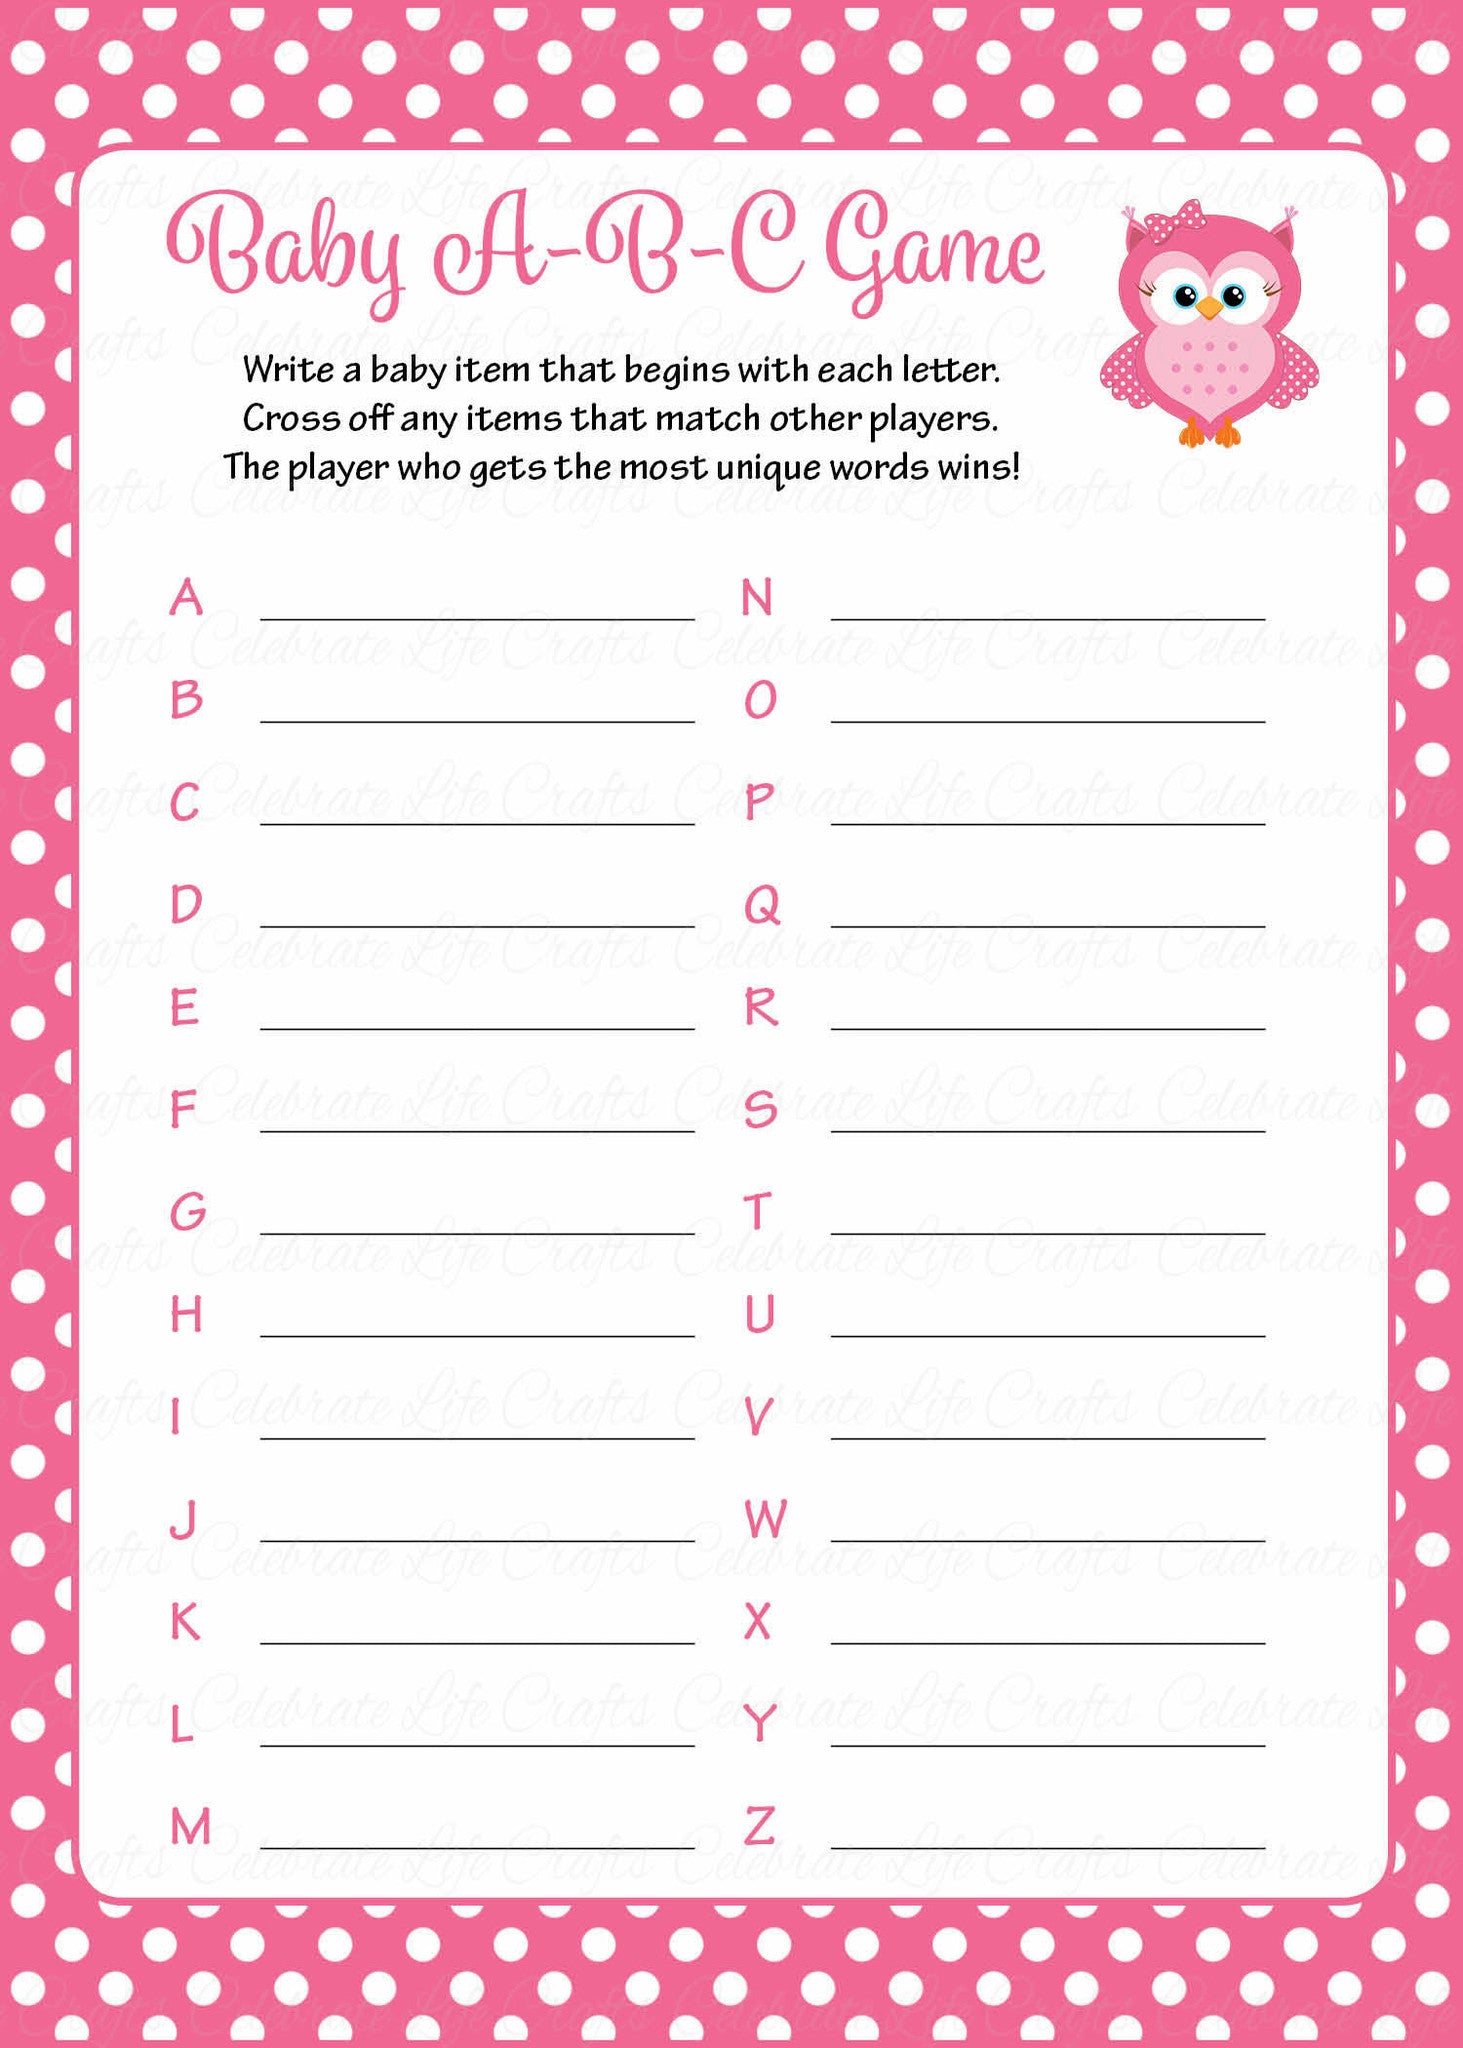 free-girl-baby-shower-printable-template-baby-shower-ideas-themes